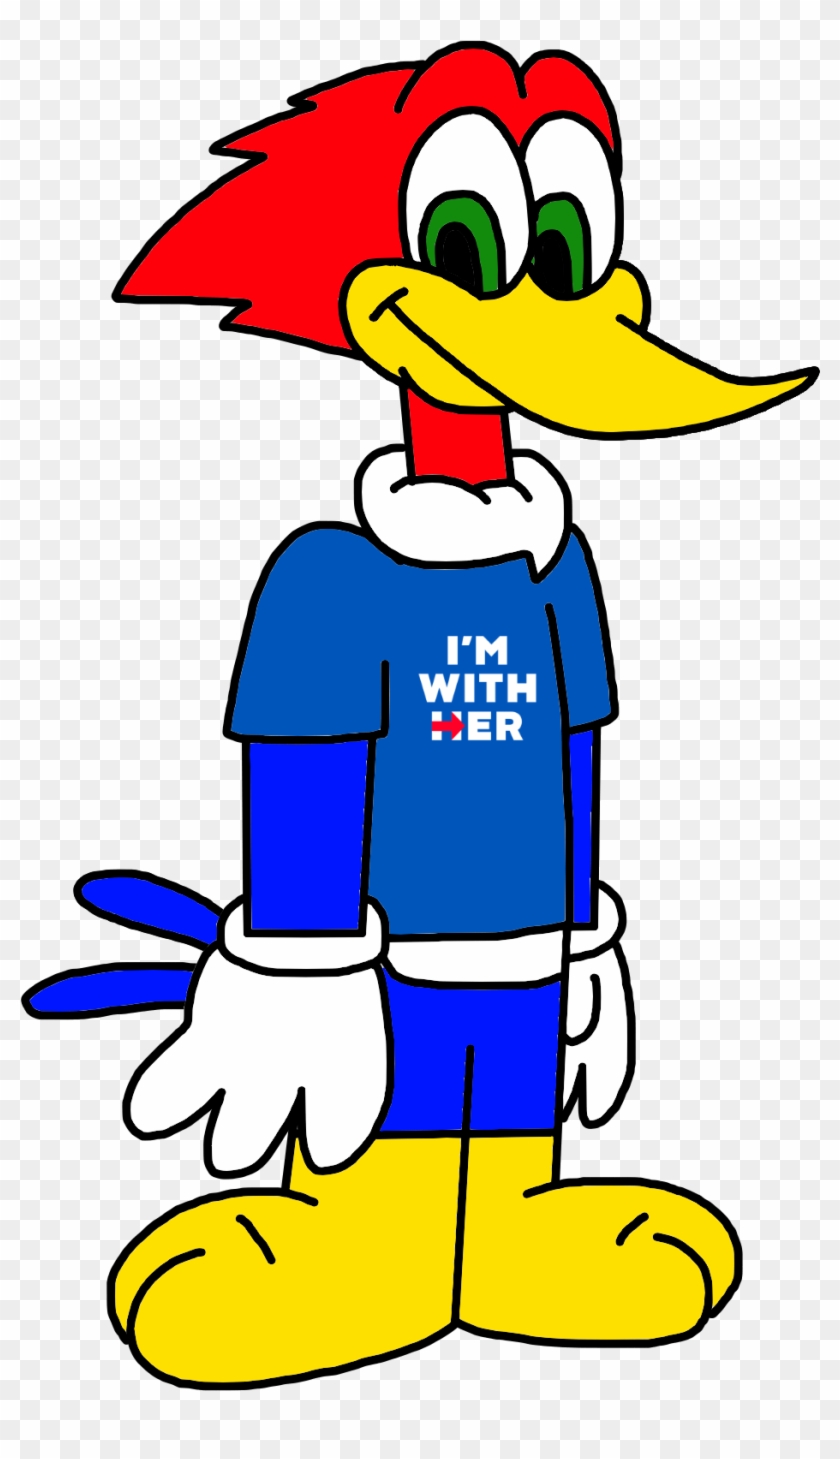 Woody Woodpecker Supports Hillary Clinton By Marcospower1996-dadrvzw - Cartoon #473685